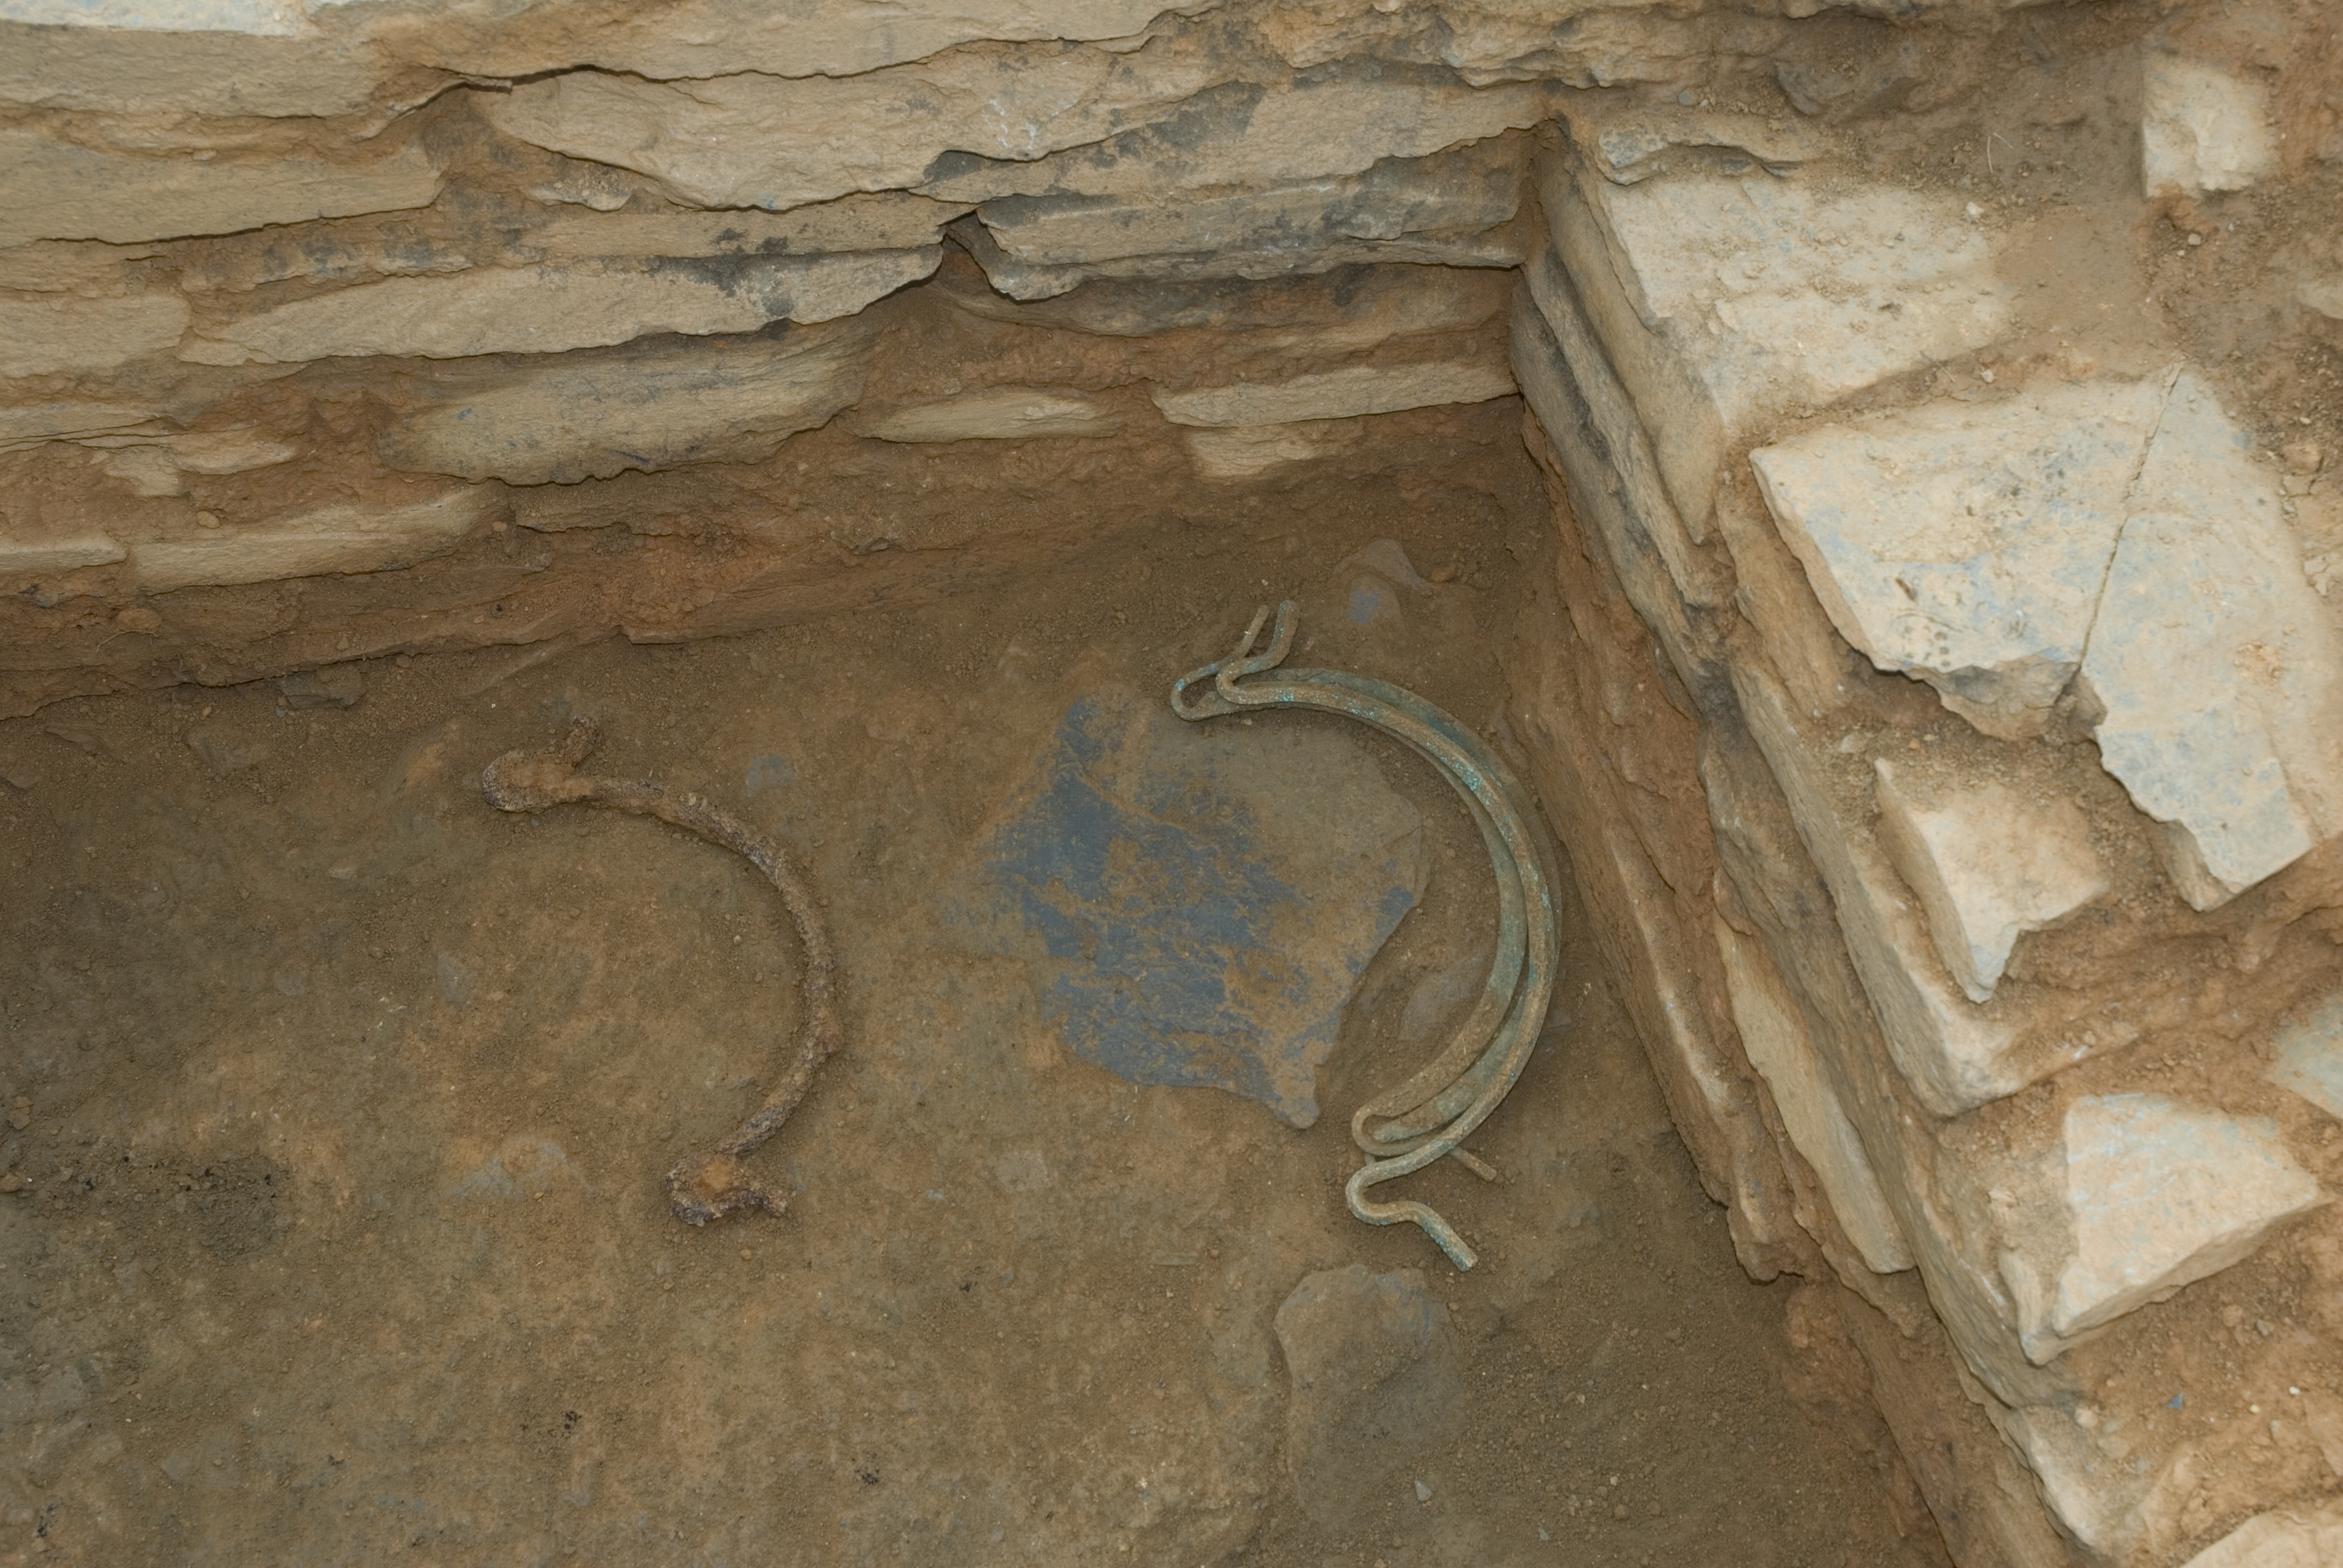 The findings continue in the Viladonga excavations. On this occasion, a set of three handles of bronze and one of iron.